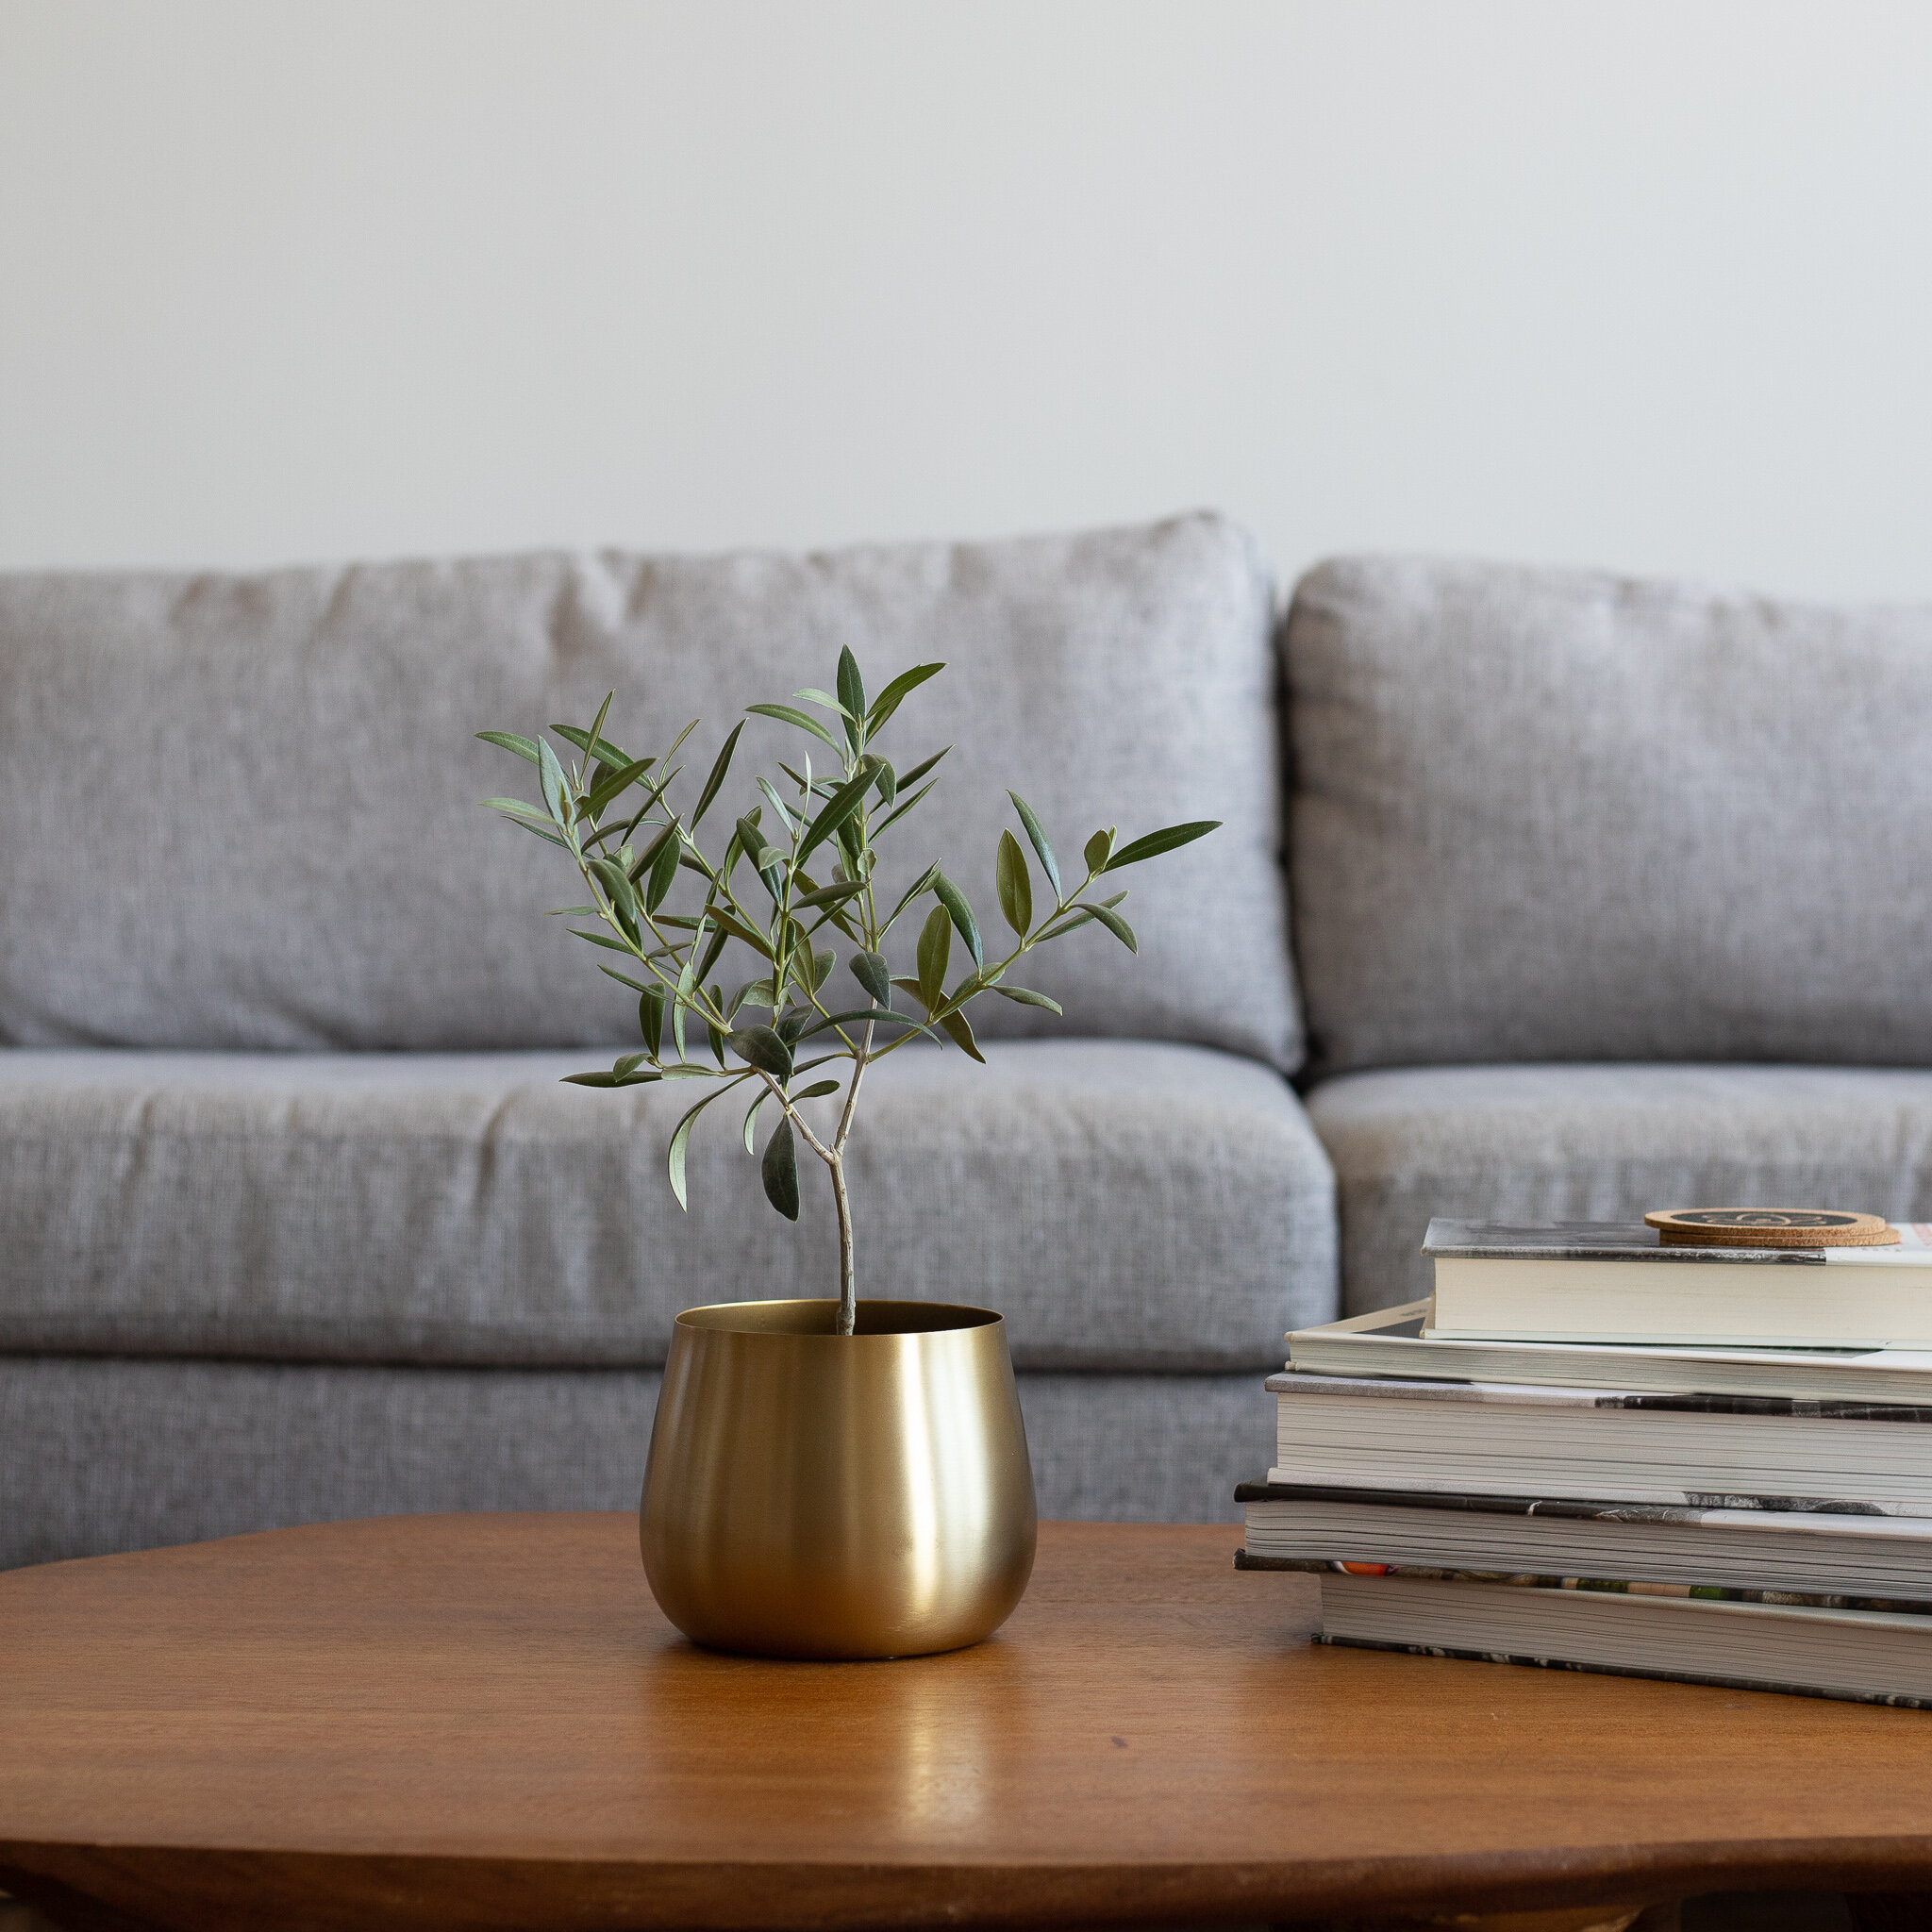 An Olive Tree plant in a gold pot sitting on a wooden table, with a few books stacked next to it, in front of a gray couch